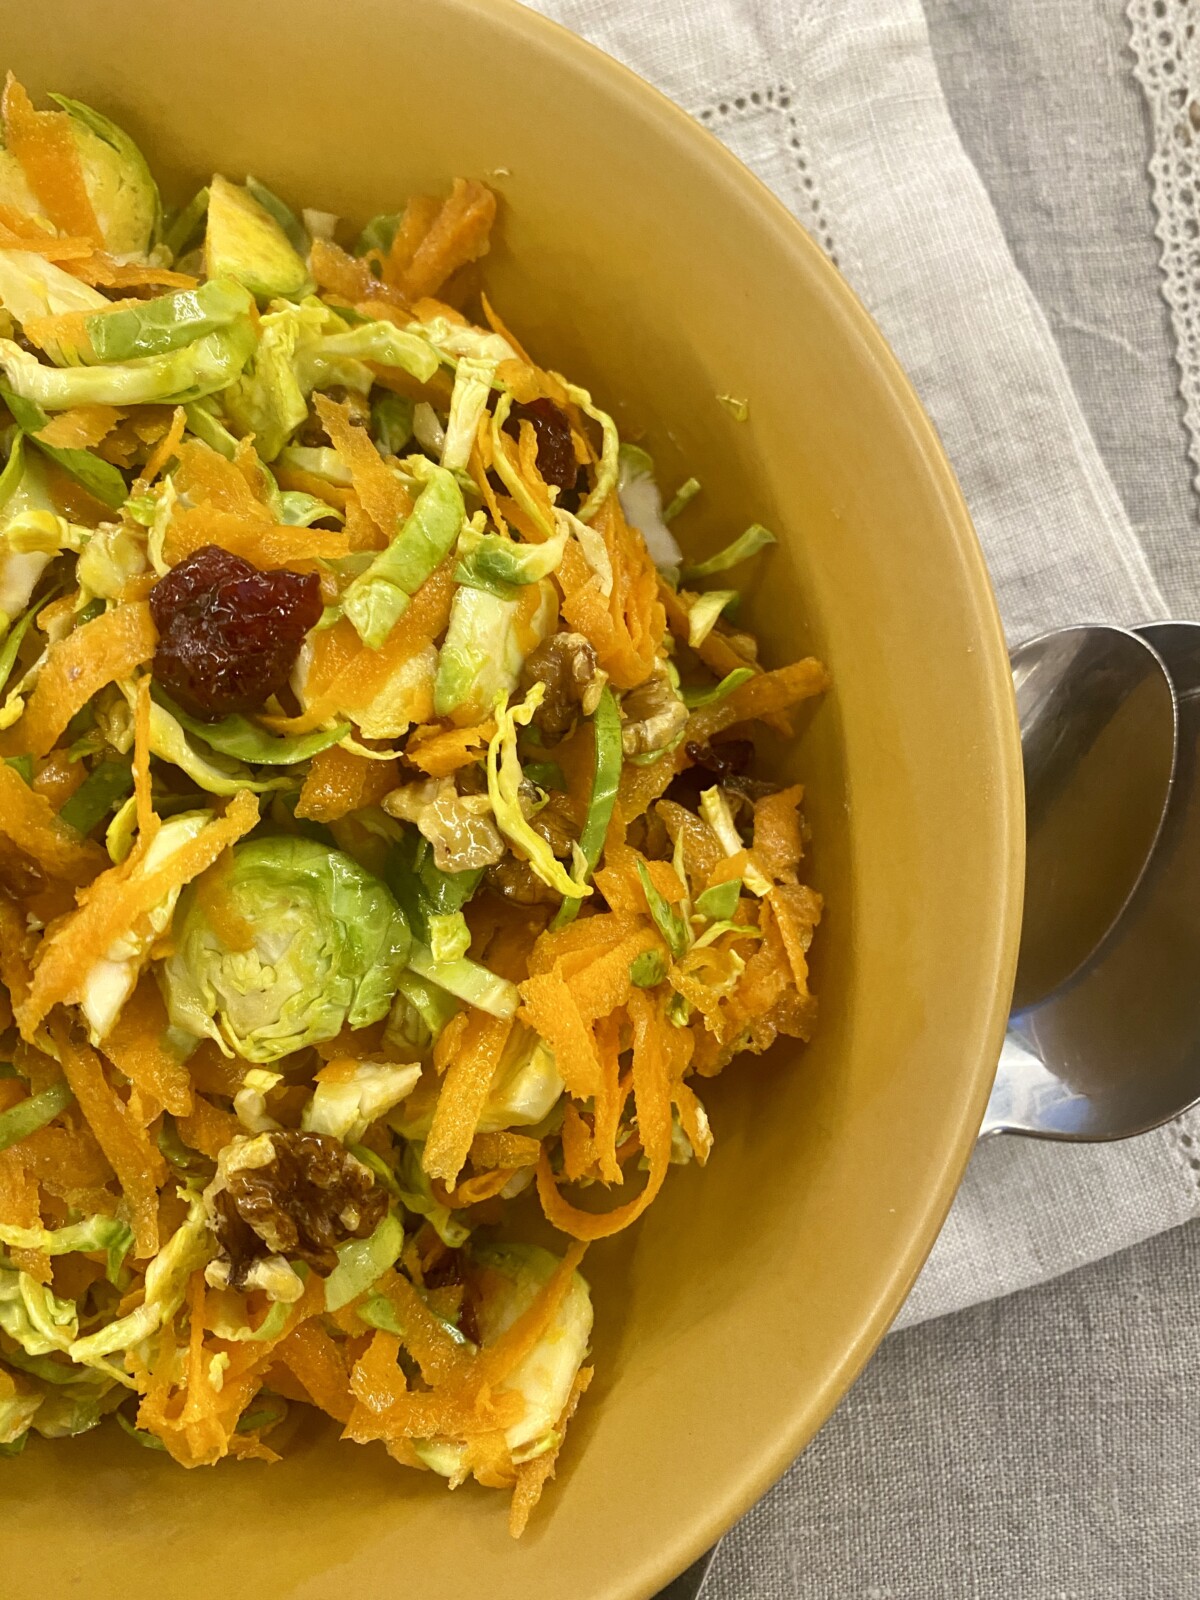 brussel sprout salad with cranberries in a mustard coloured bowl